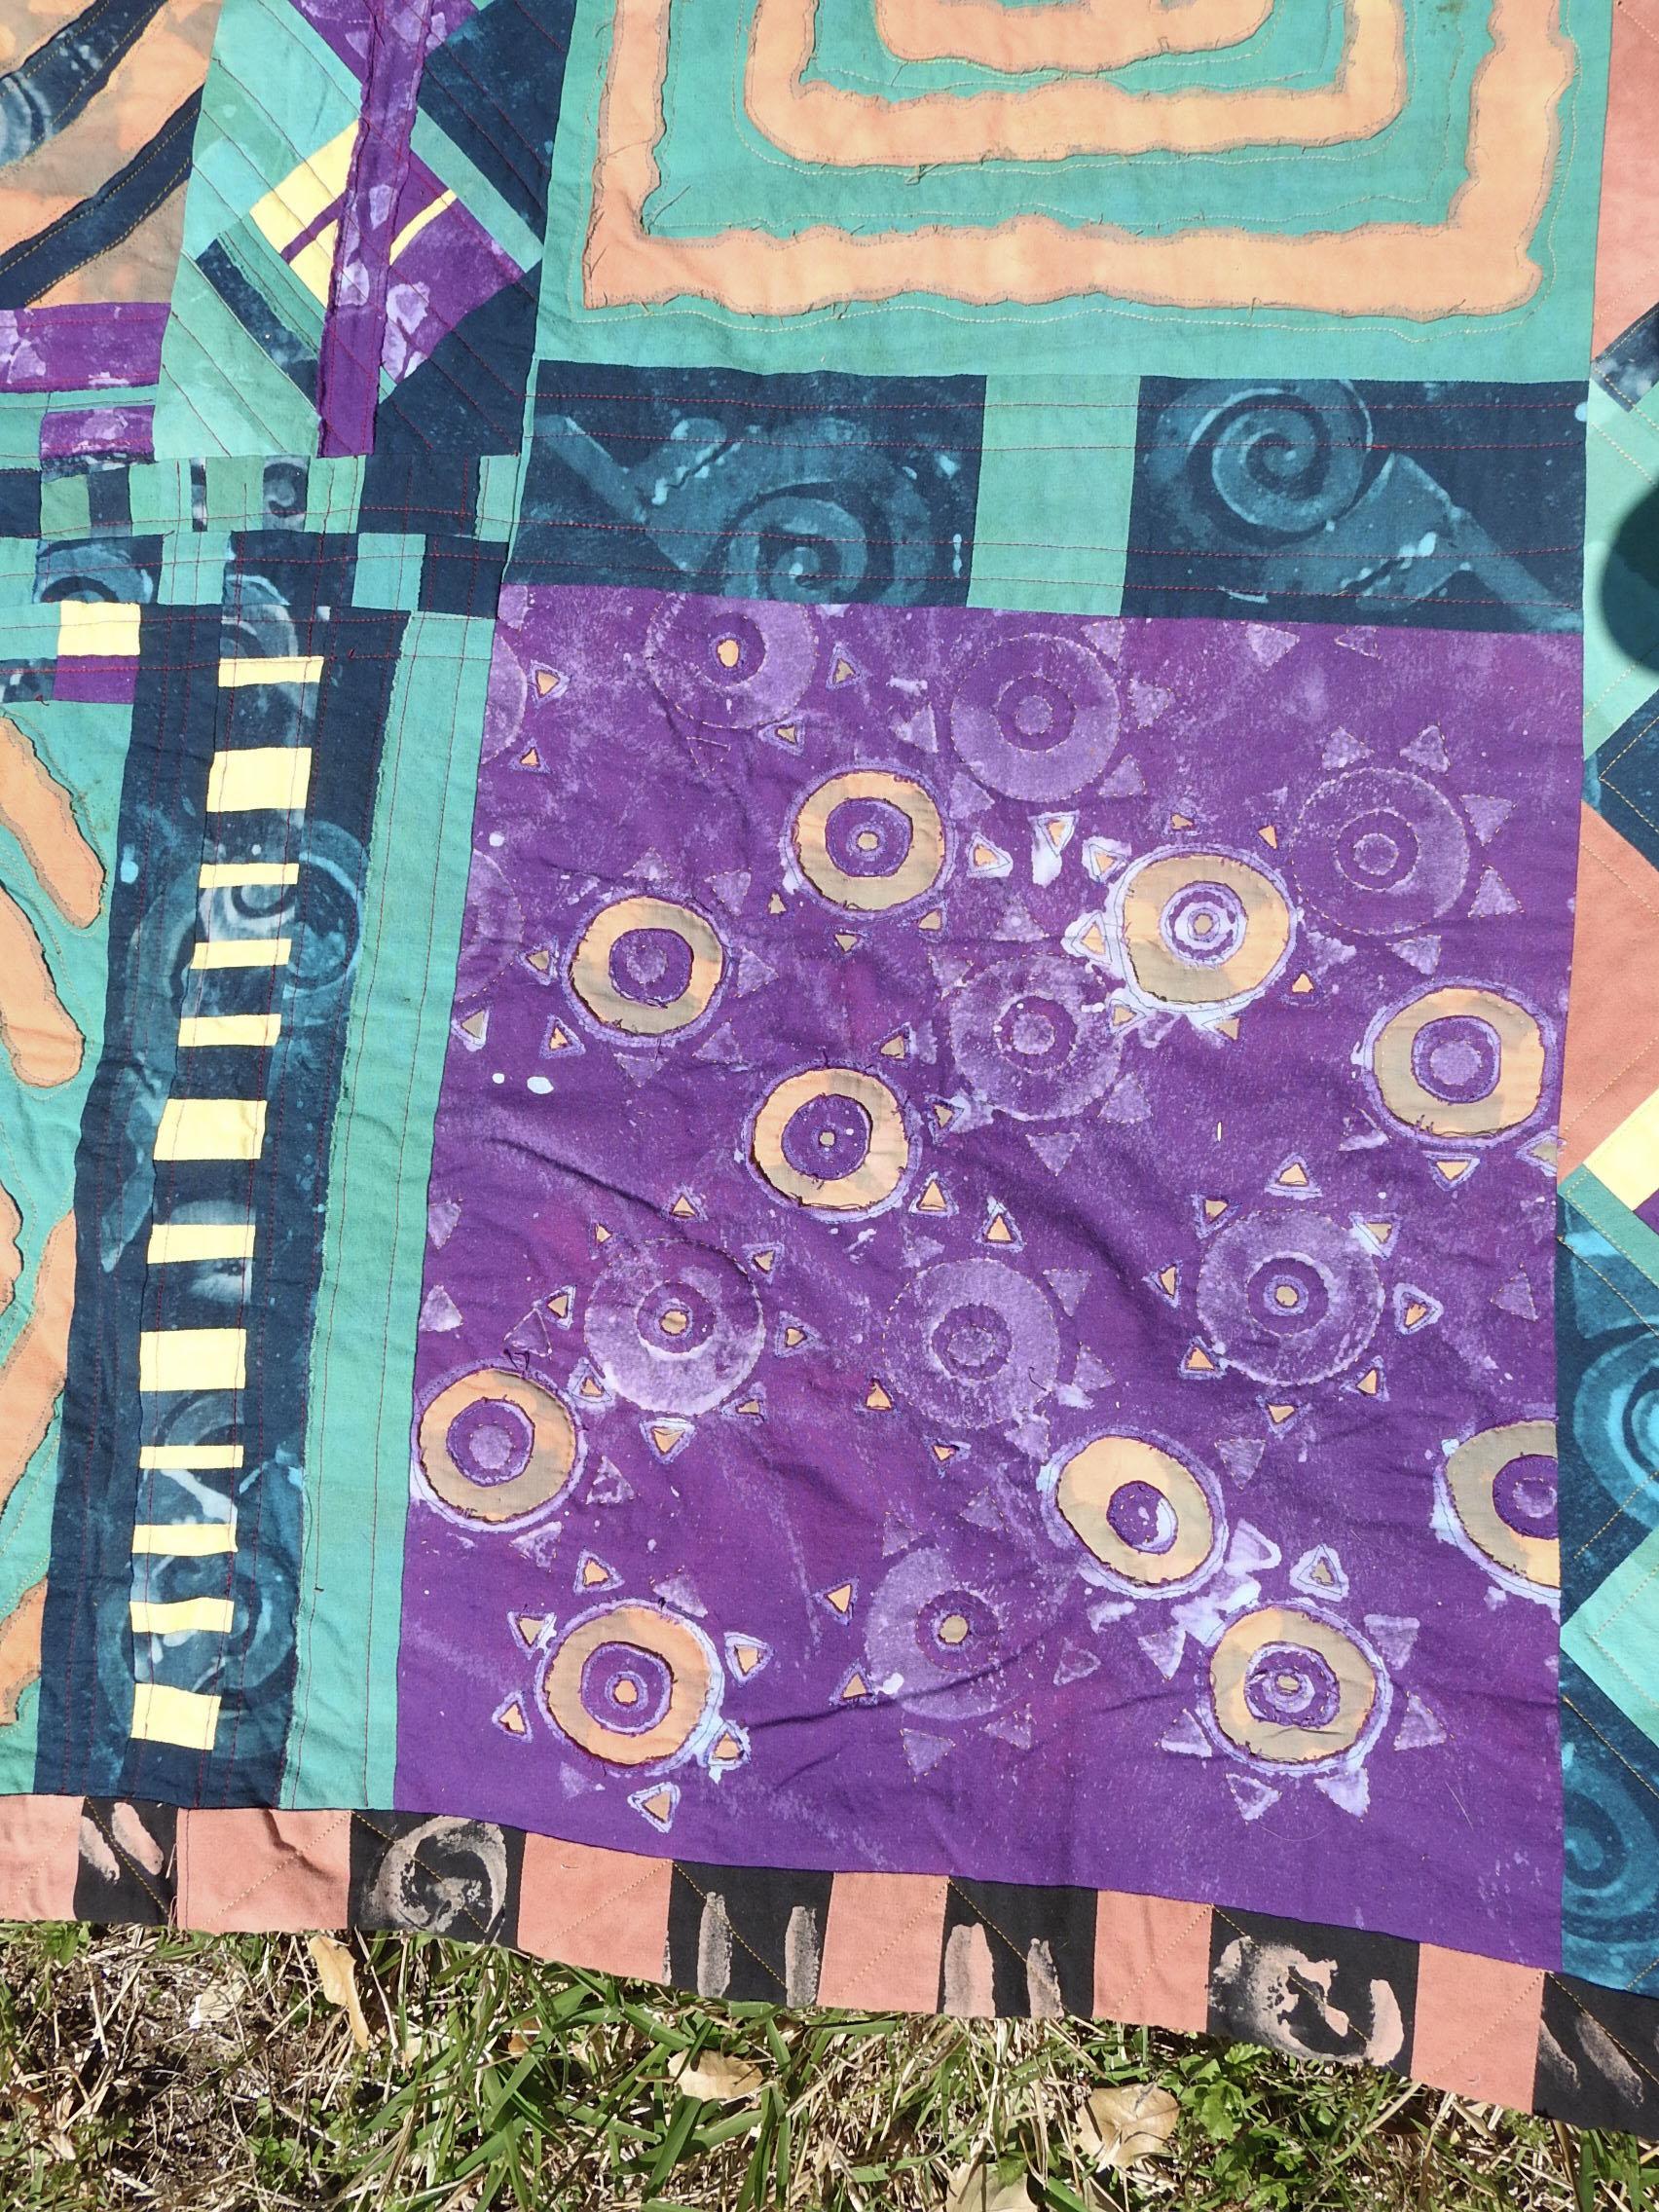 Vintage circa 1990's cotton textile artist made art quilt.  Abstract design with spirals, dyed cotton, machine pieced and quilted with a layered raw edge applique technique, low loft.